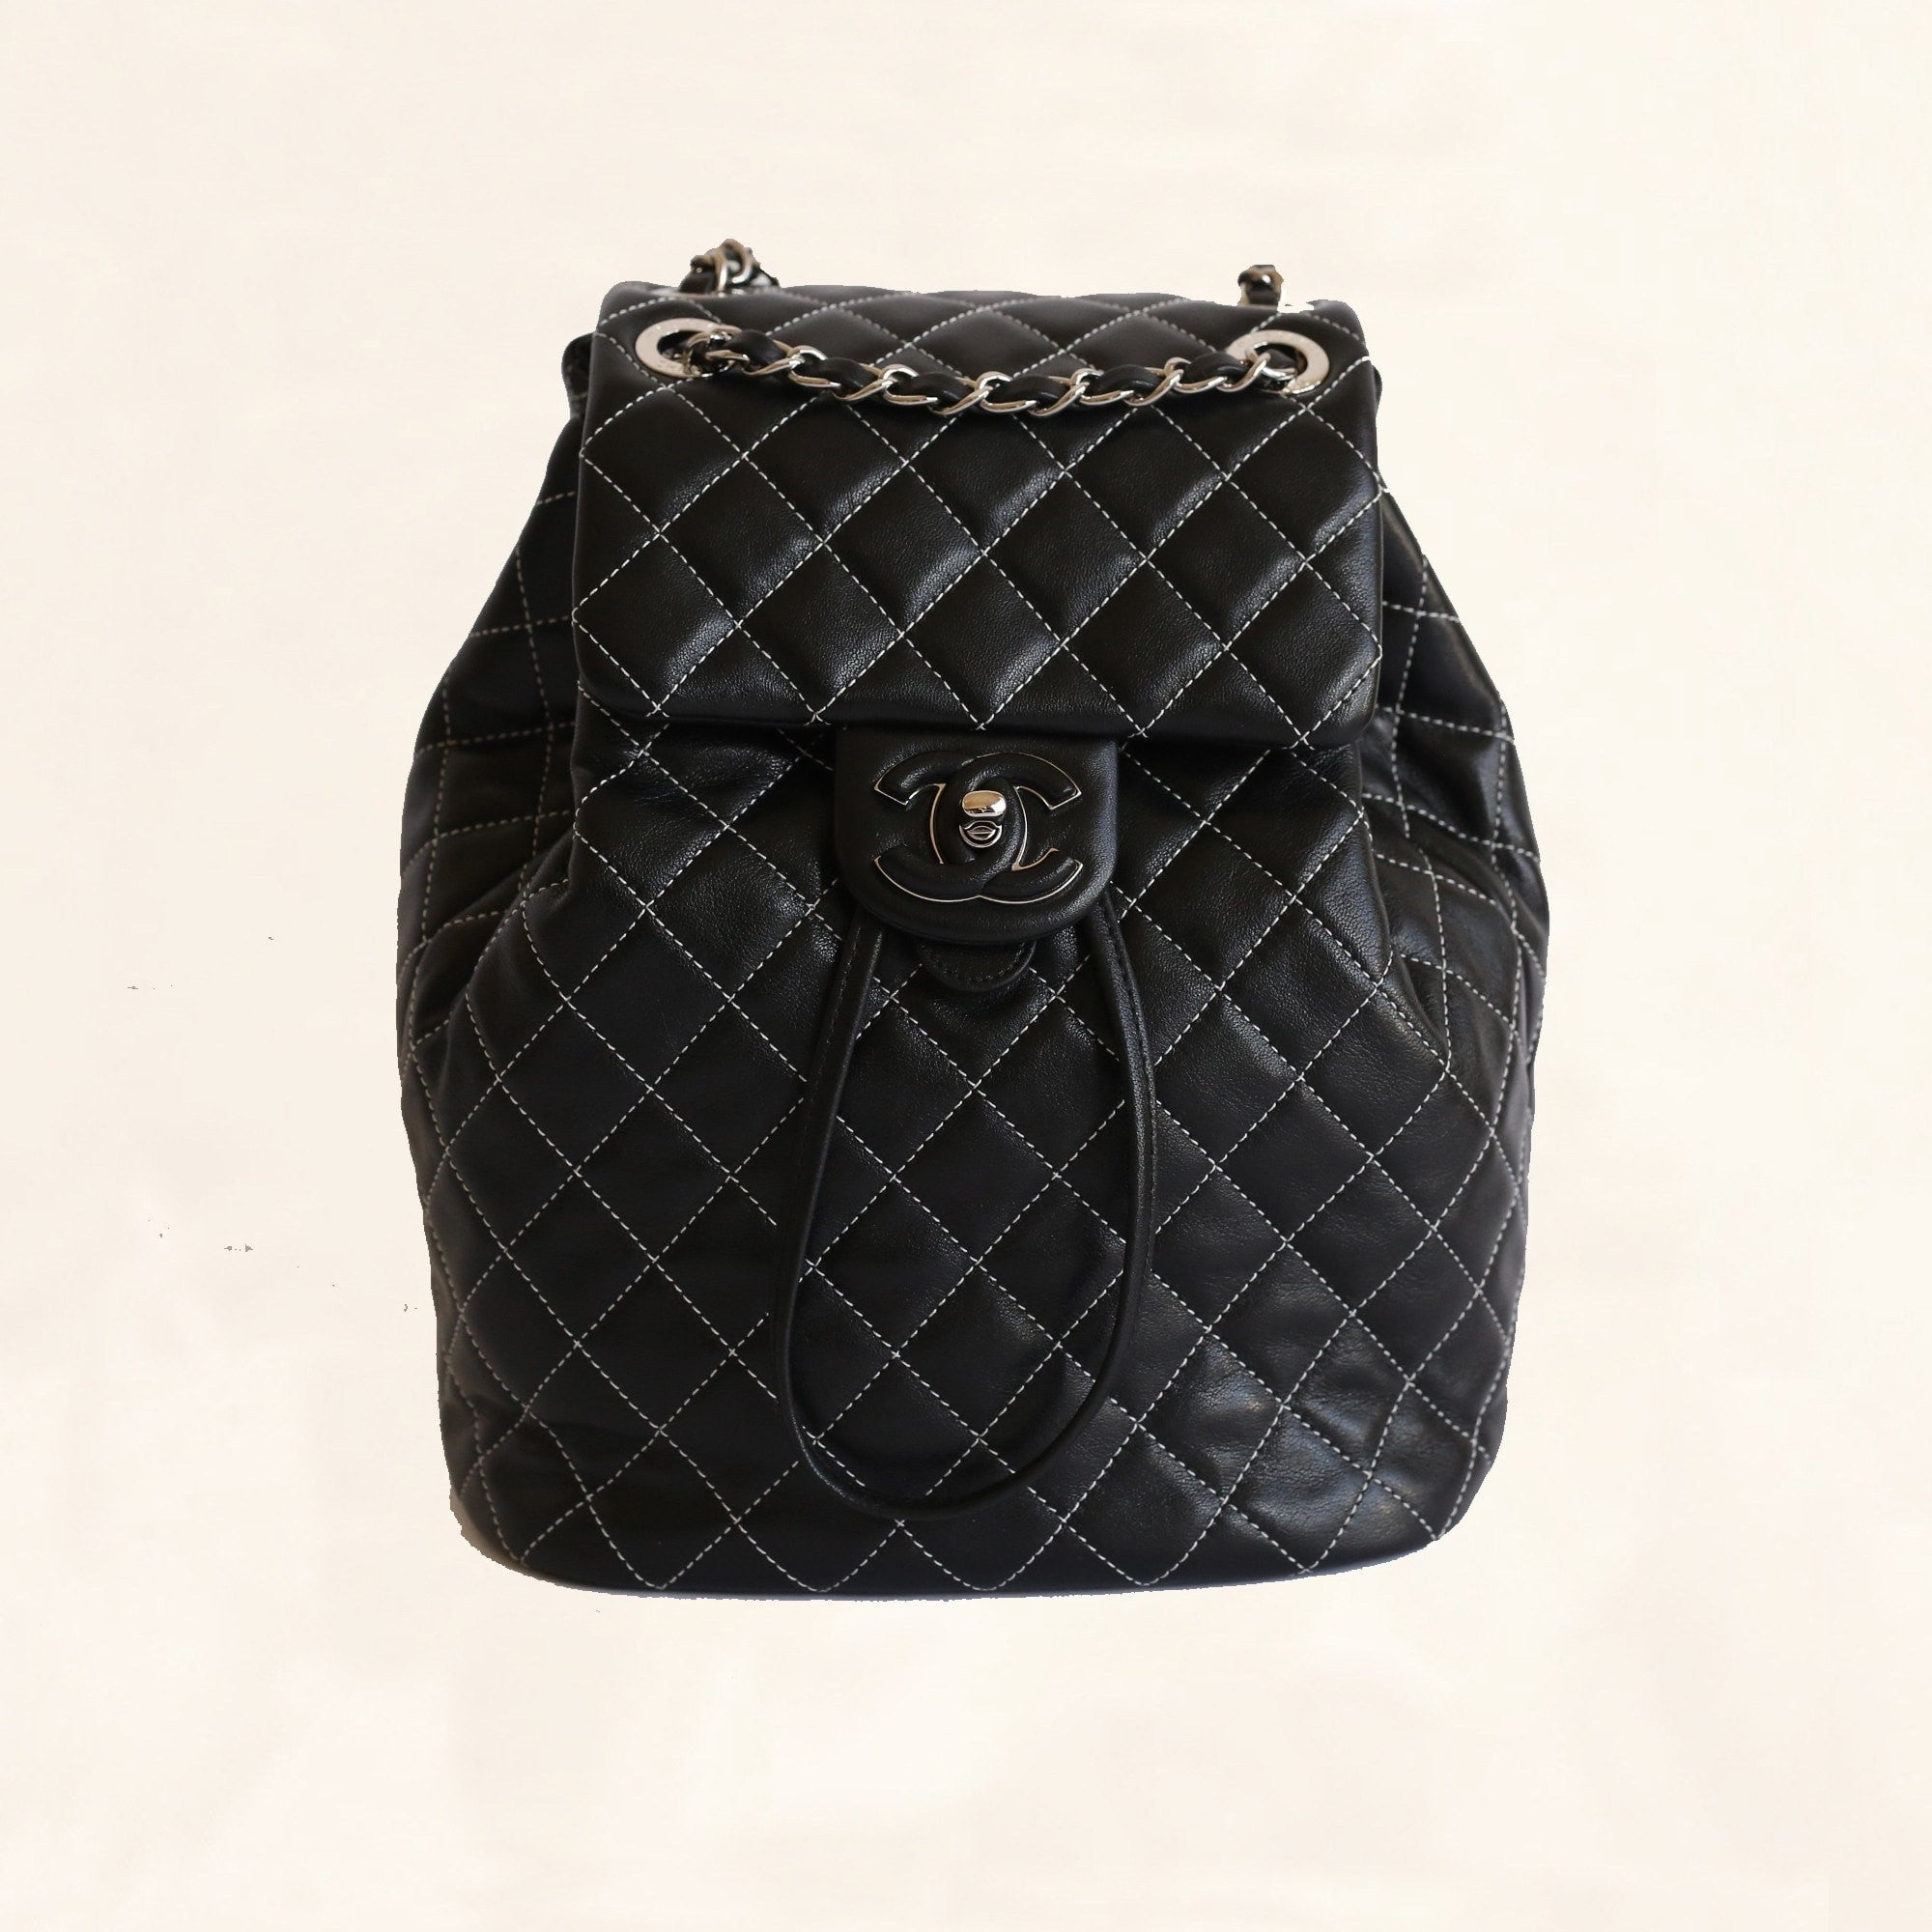 Chanel Black Quilted Lambskin Leather Duma Backpack Chanel